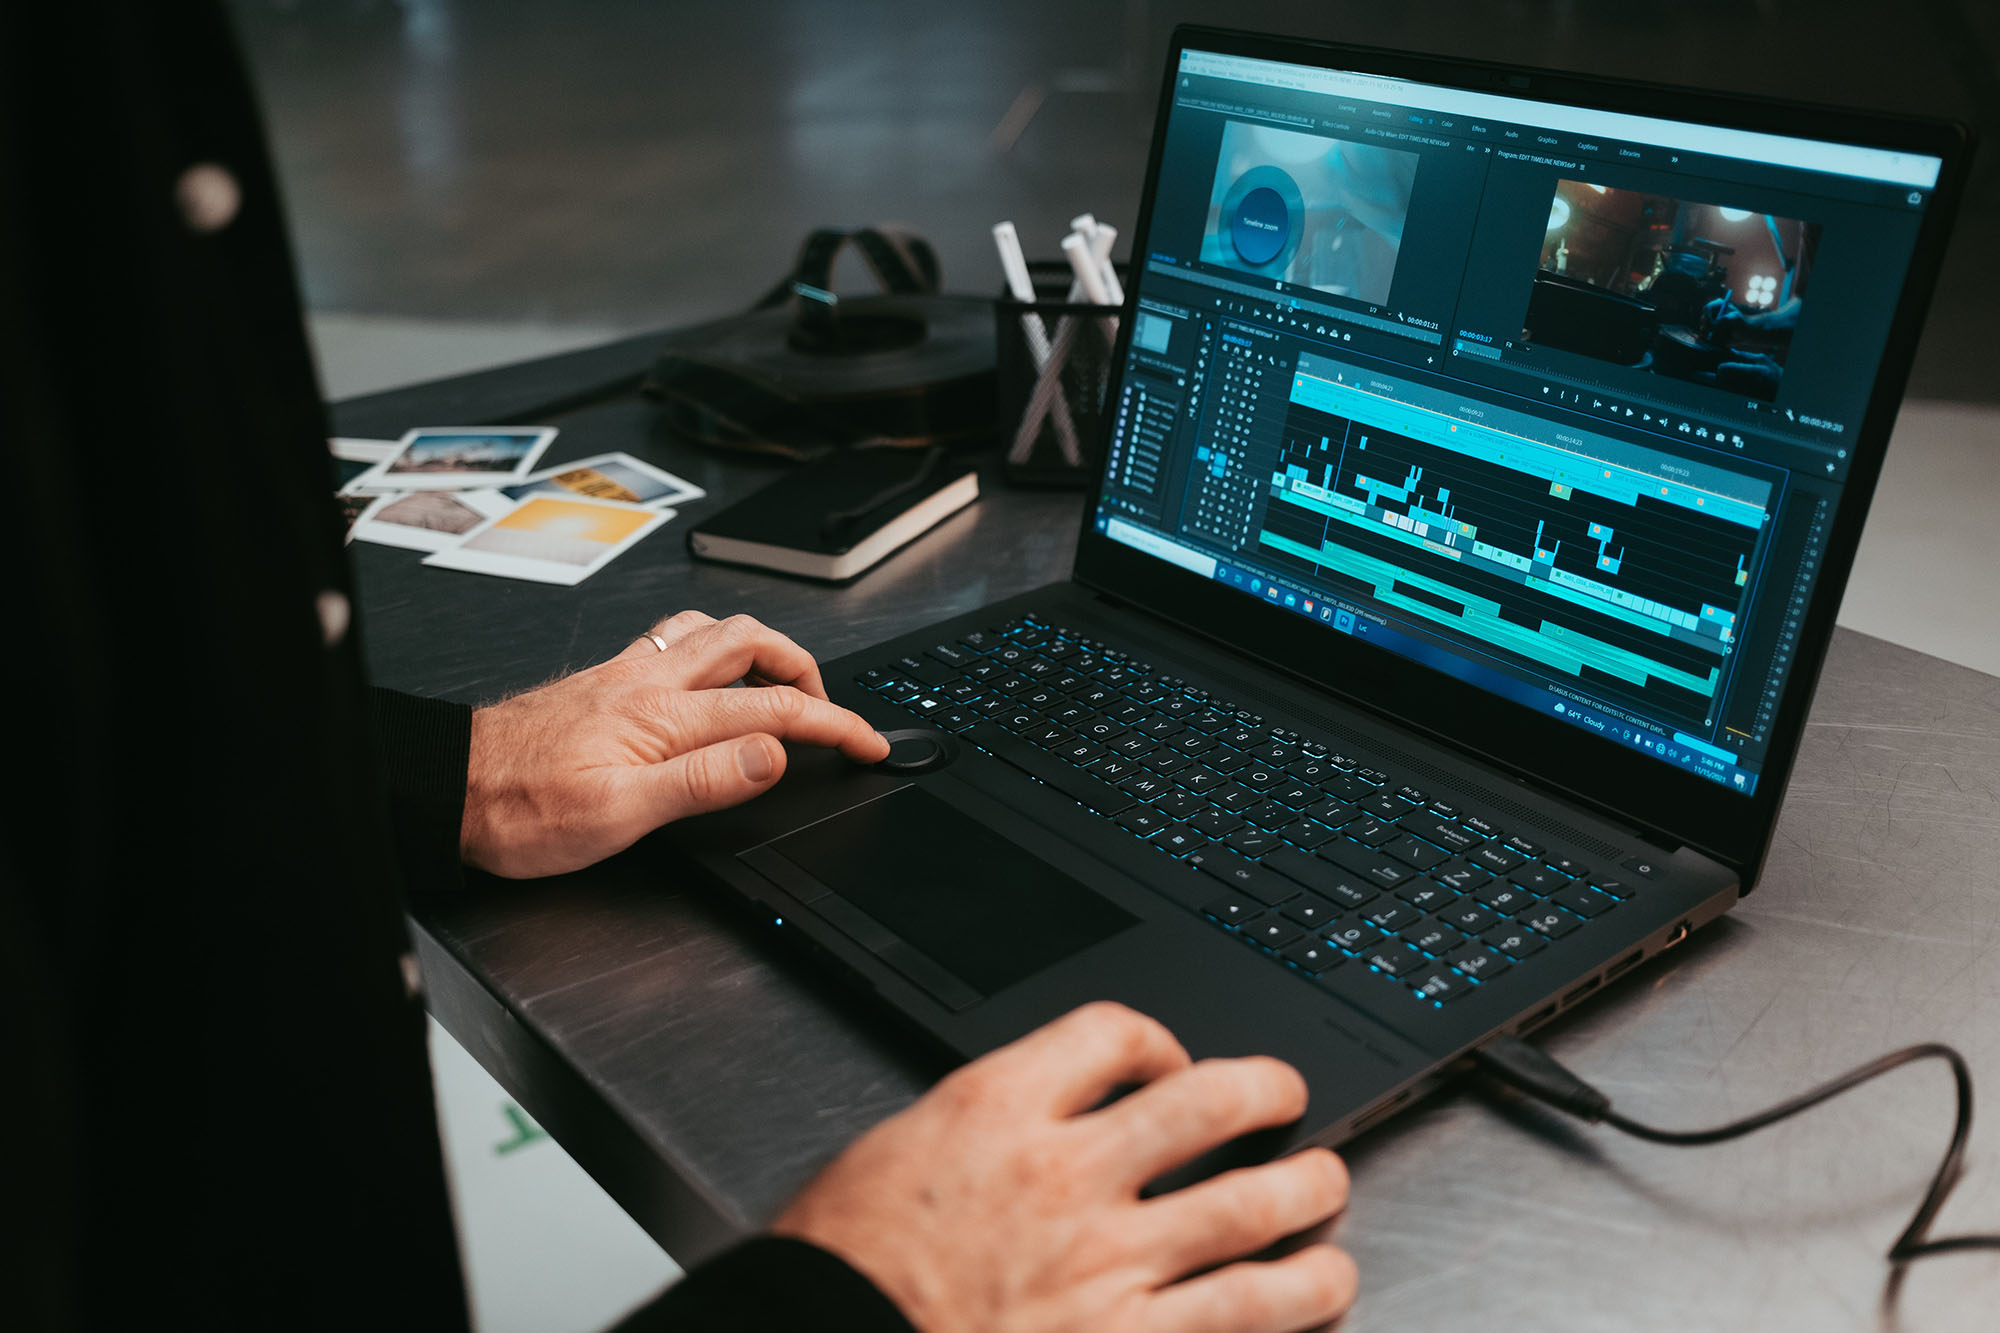 Photo of someone editing a video using video editing software on their laptop. Two hands and the laptop screen are seen as they work on a metal table.